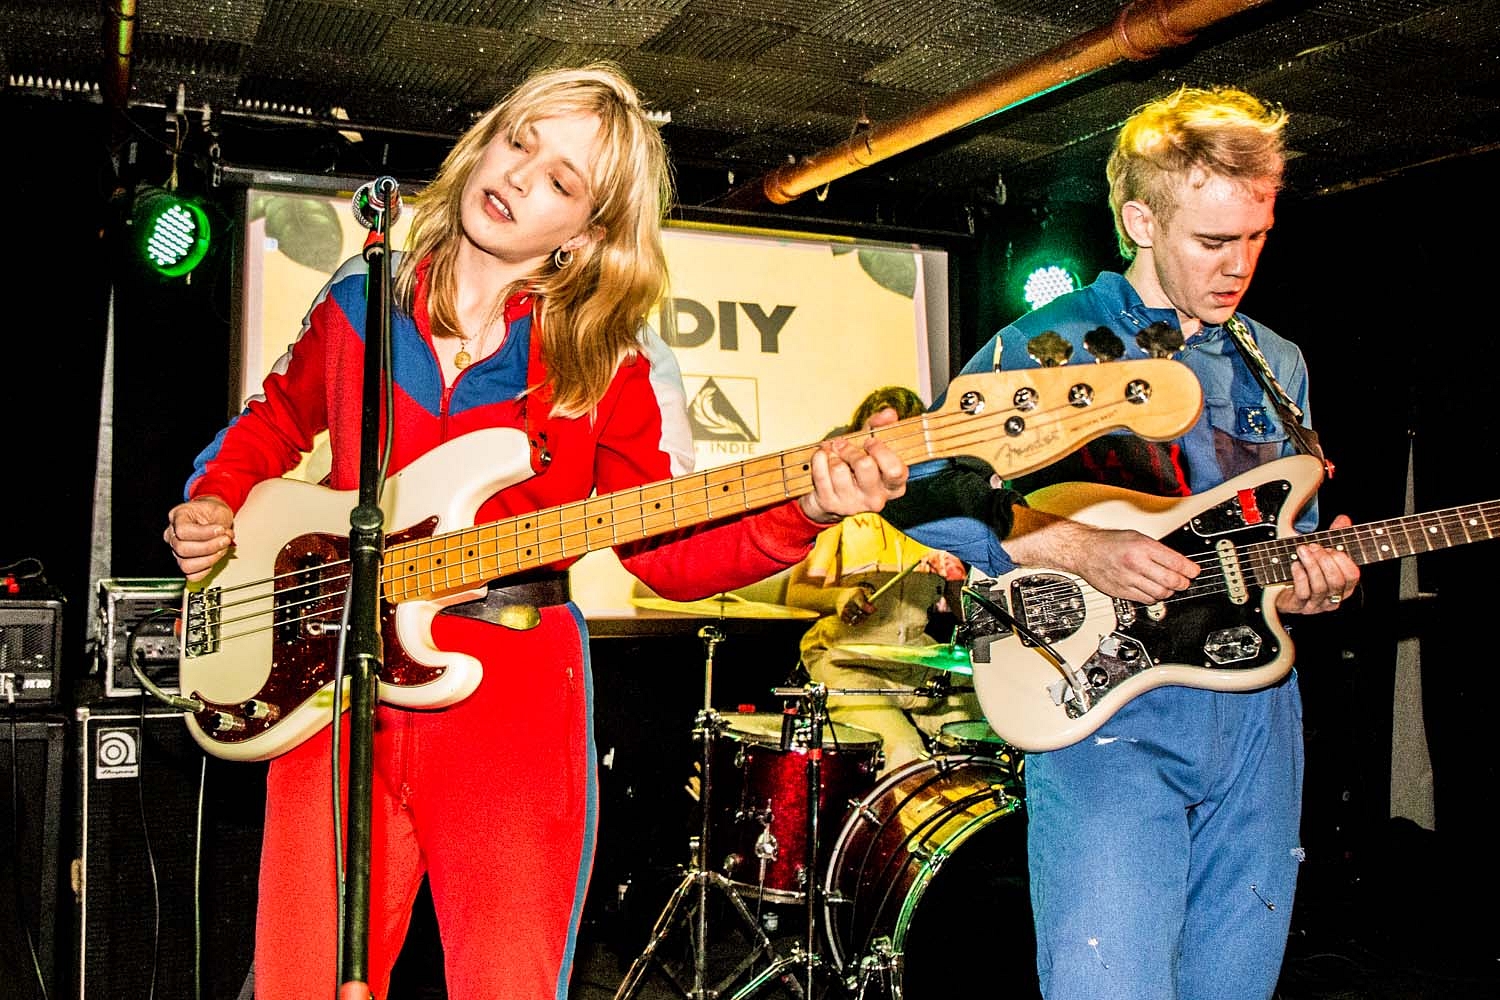 Whenyoung, Body Type, Penelope Isles and more lead the charge for DIY’s takeover at New Colossus Festival